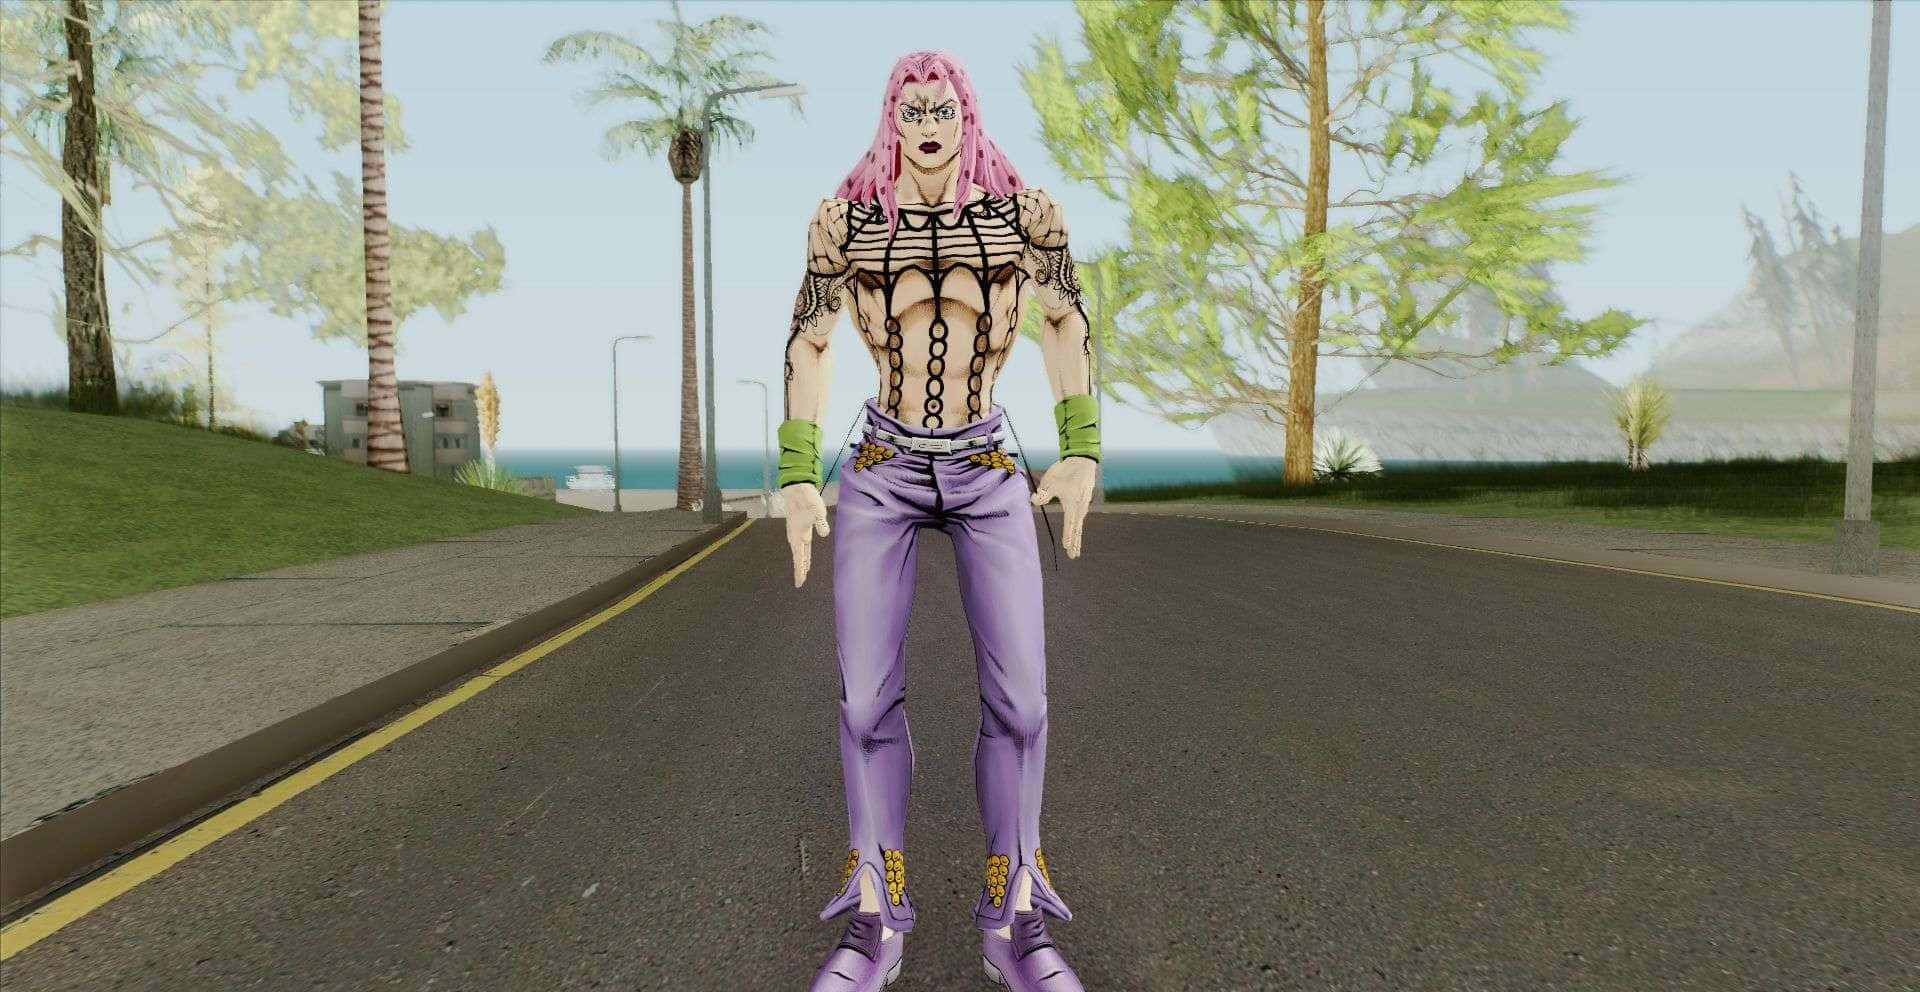 The powerful Diavolo from Jojo's Bizarre Adventure posing in front of the iconic Colosseum ruins Wallpaper